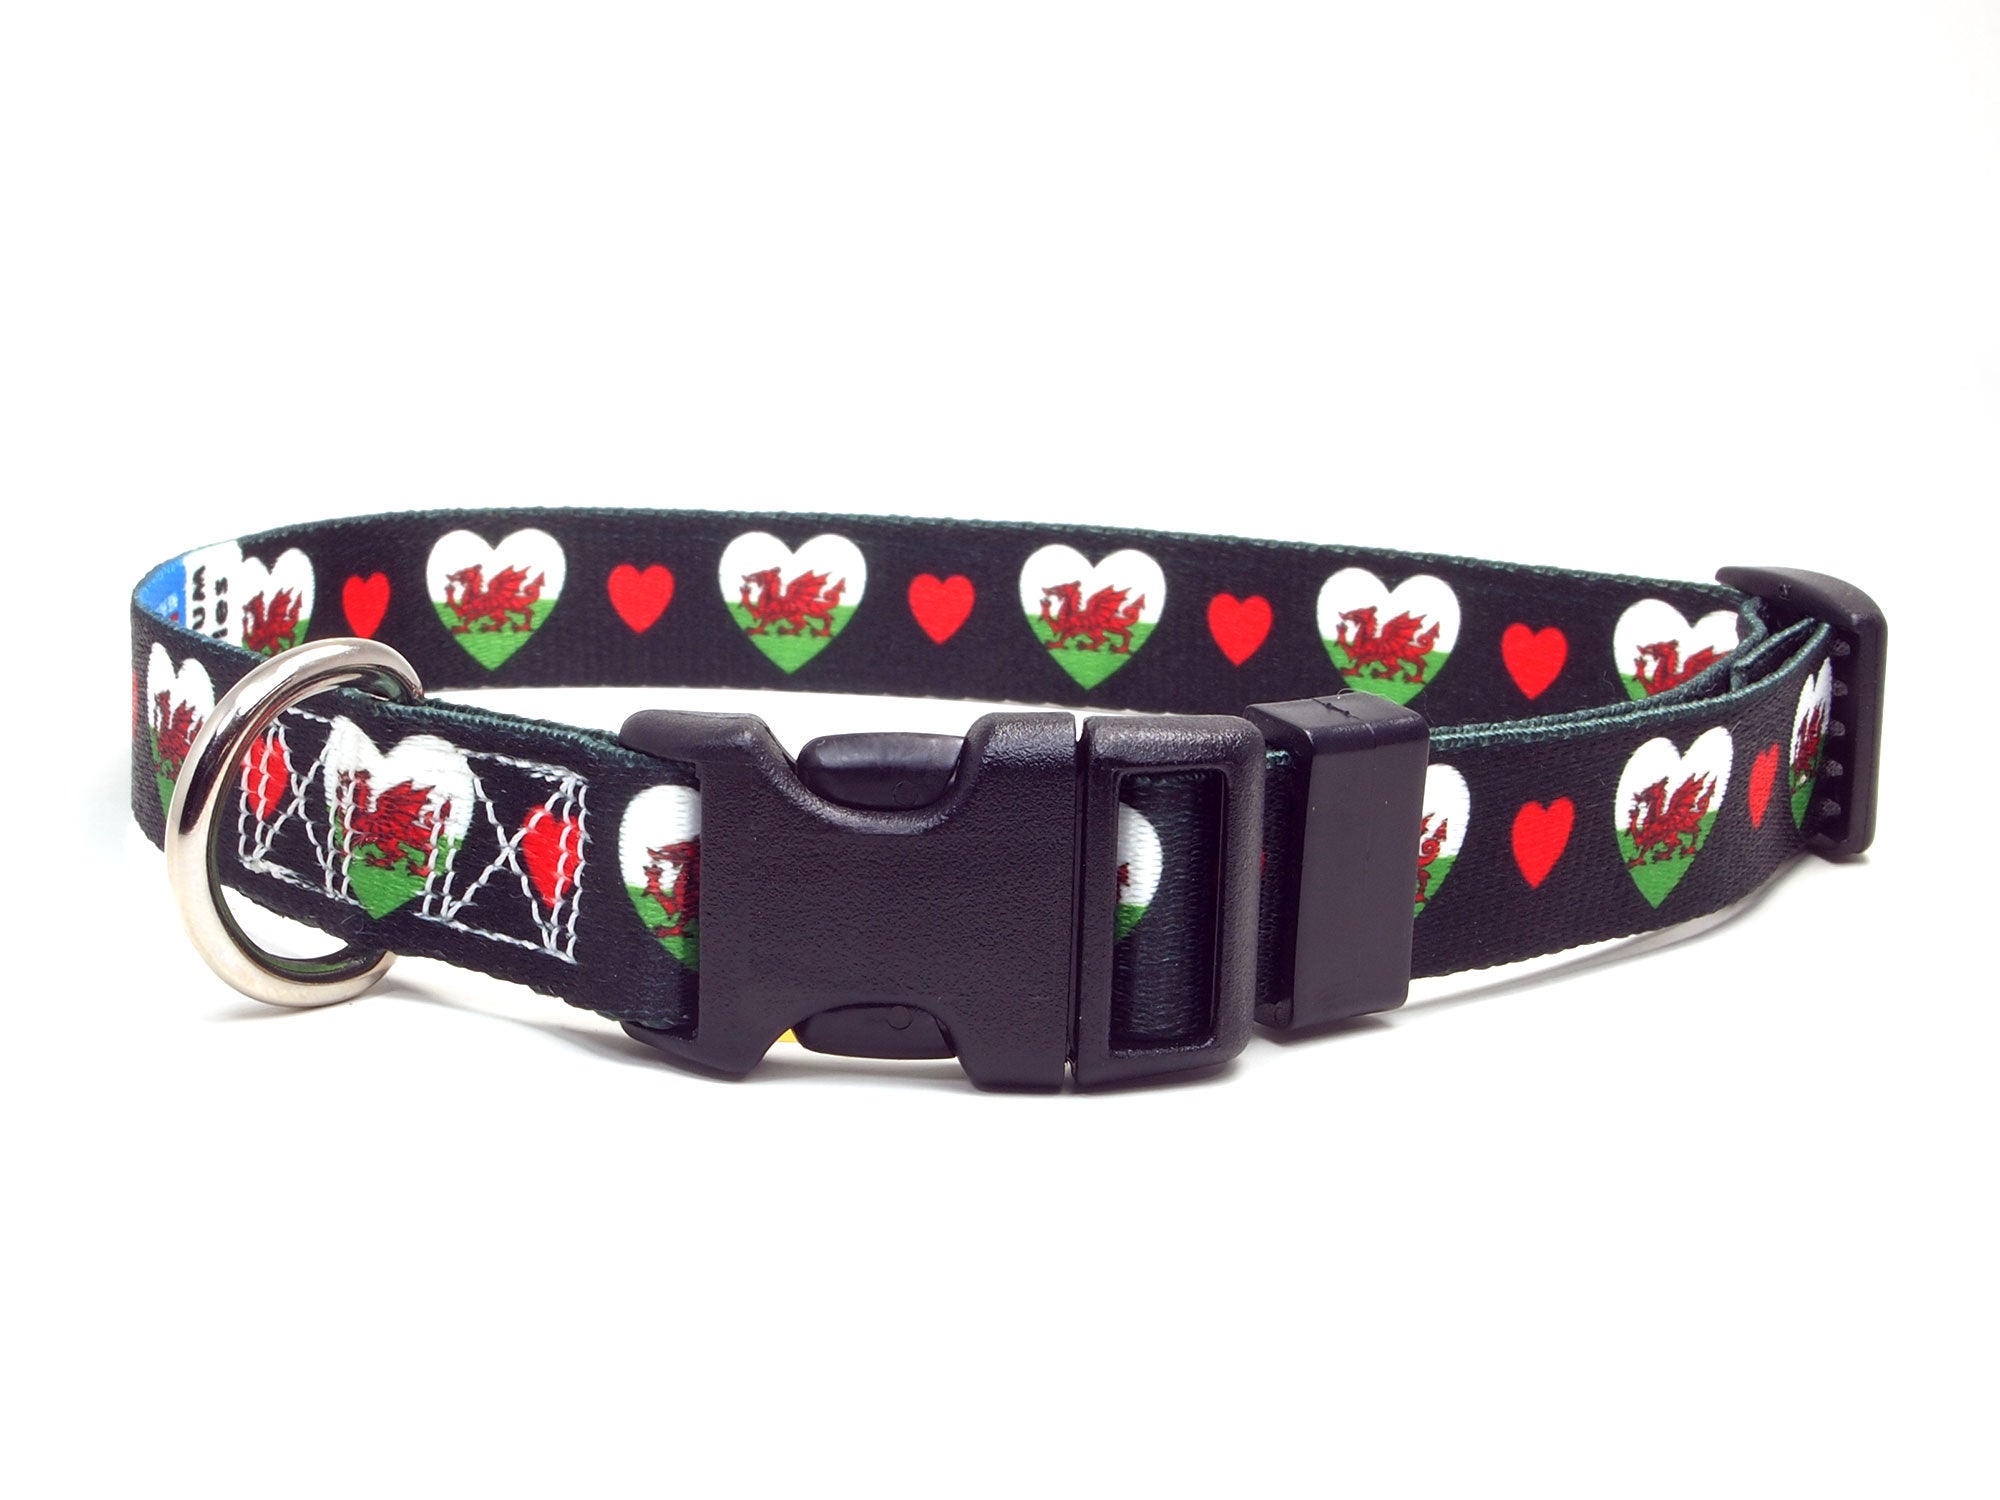 Dog Collar with Wales Hearts Pattern in black